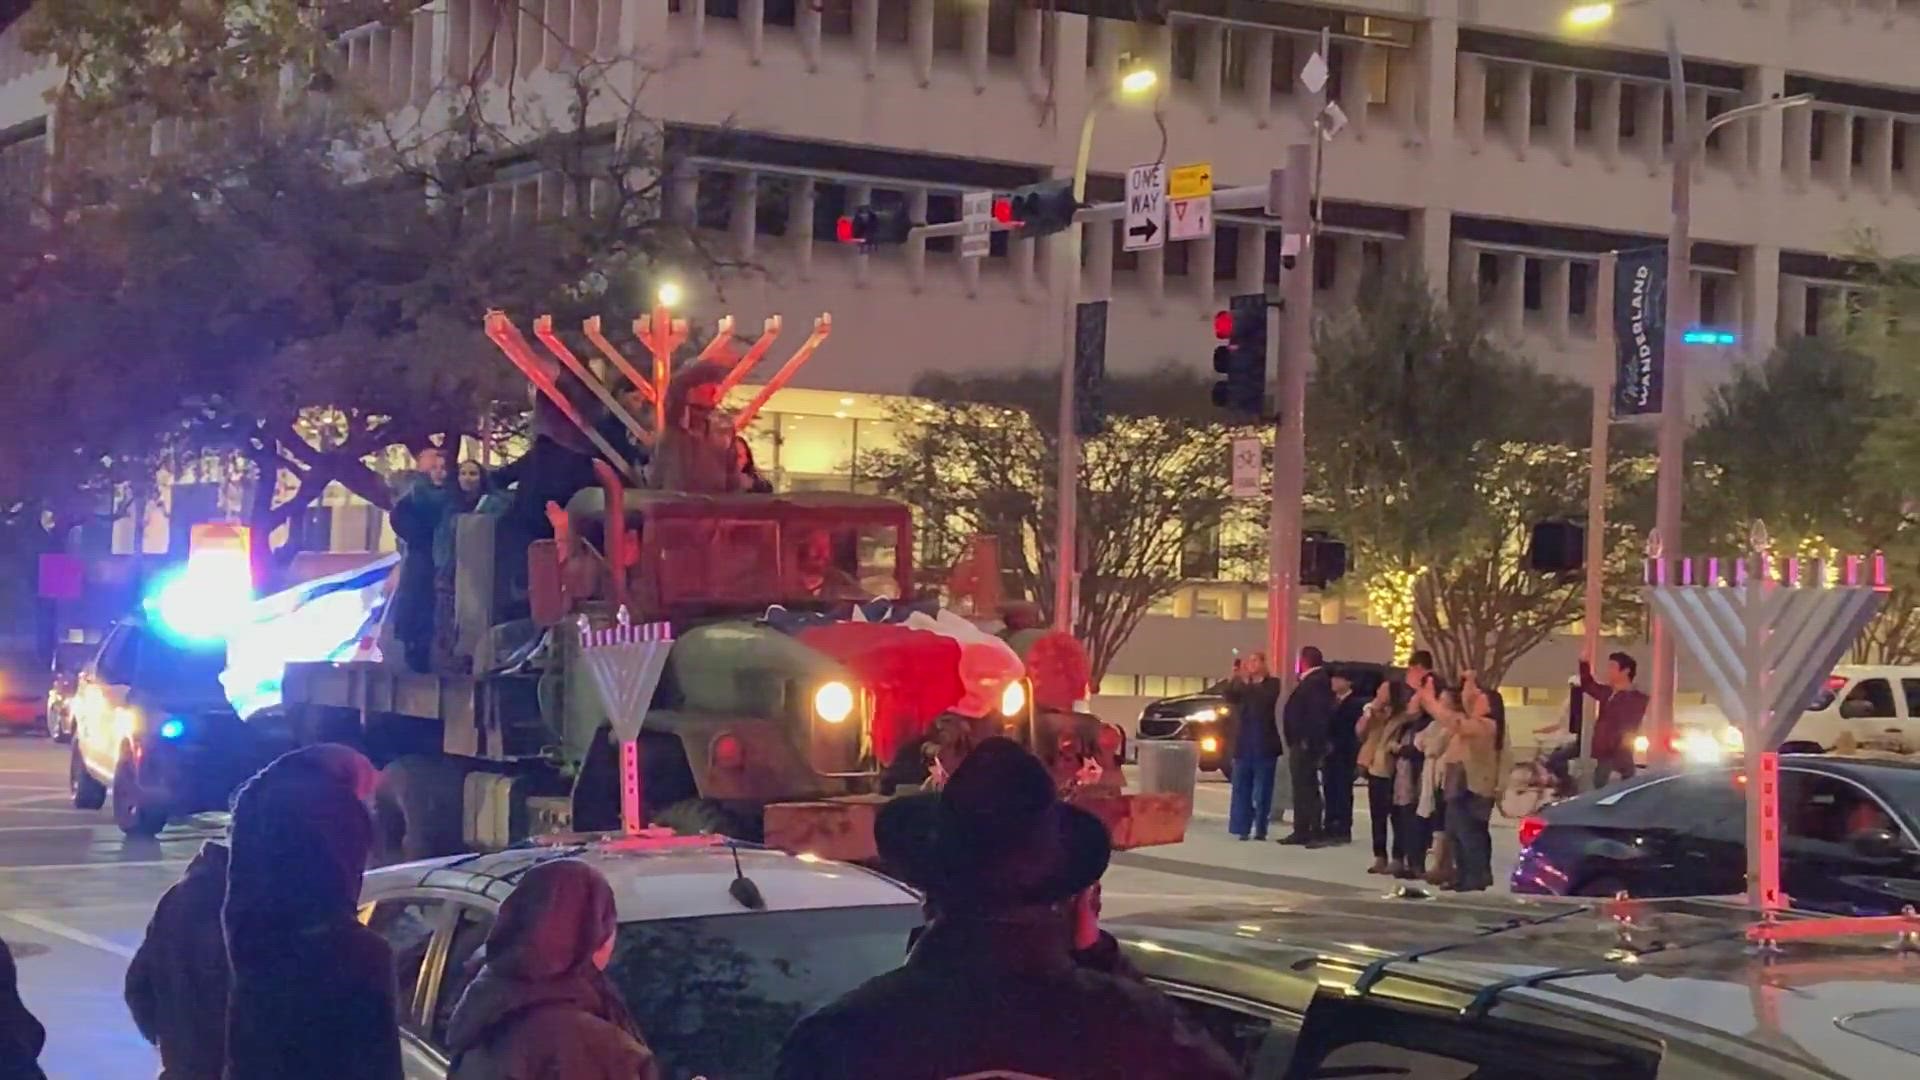 Video of the menorah parade arriving in downtown Houston on Sunday, Nov. 28, 2021.
Credit: Randy Klein